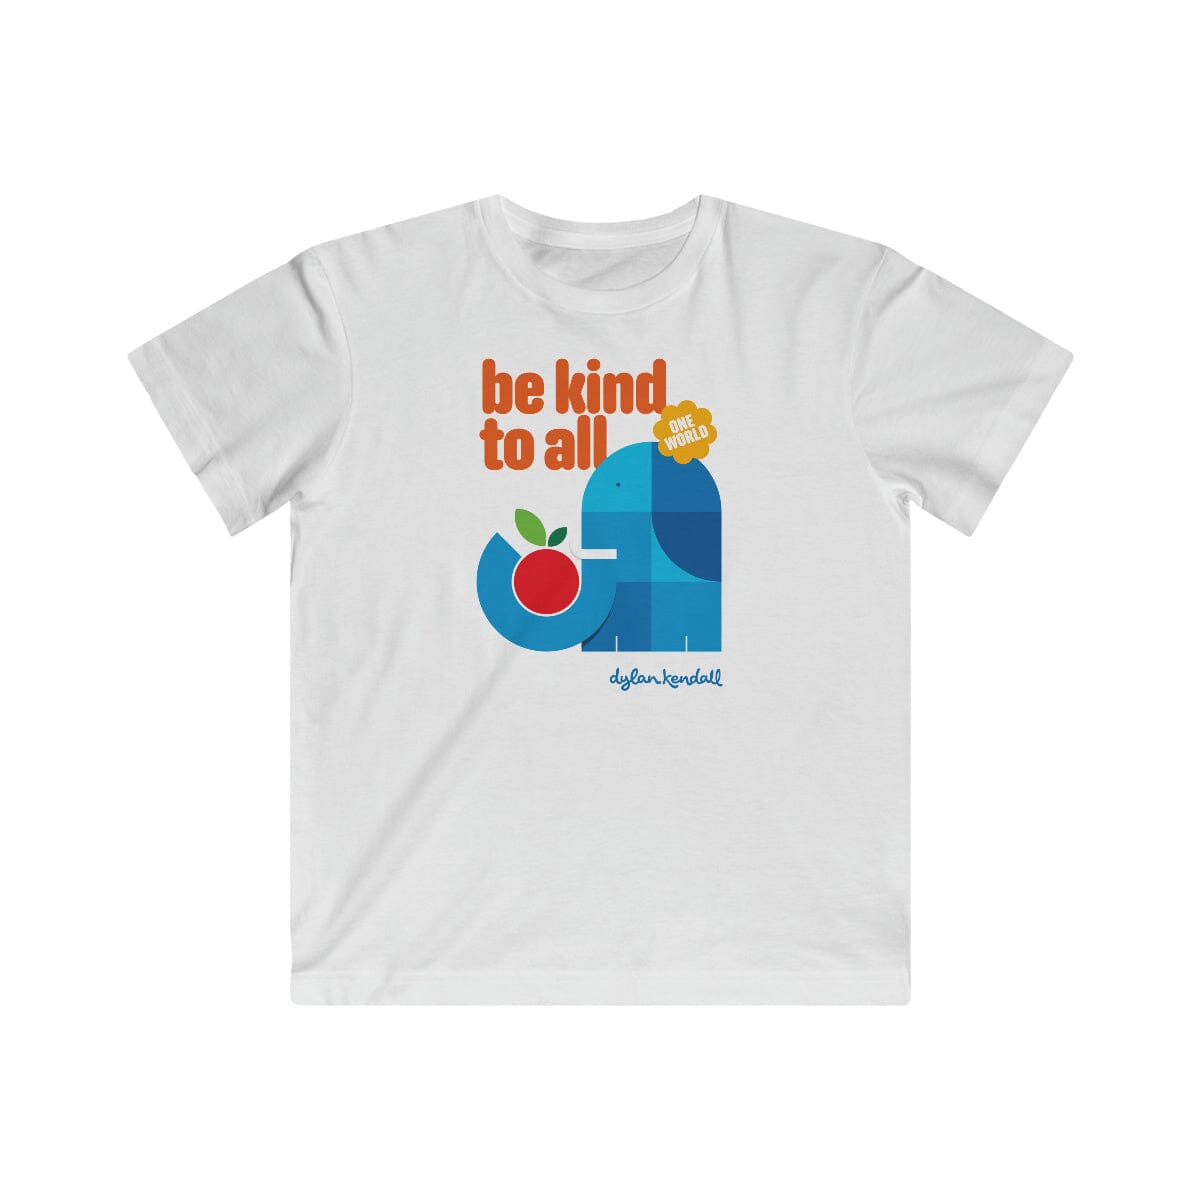 Kids T-Shirt | All! Kind Be To